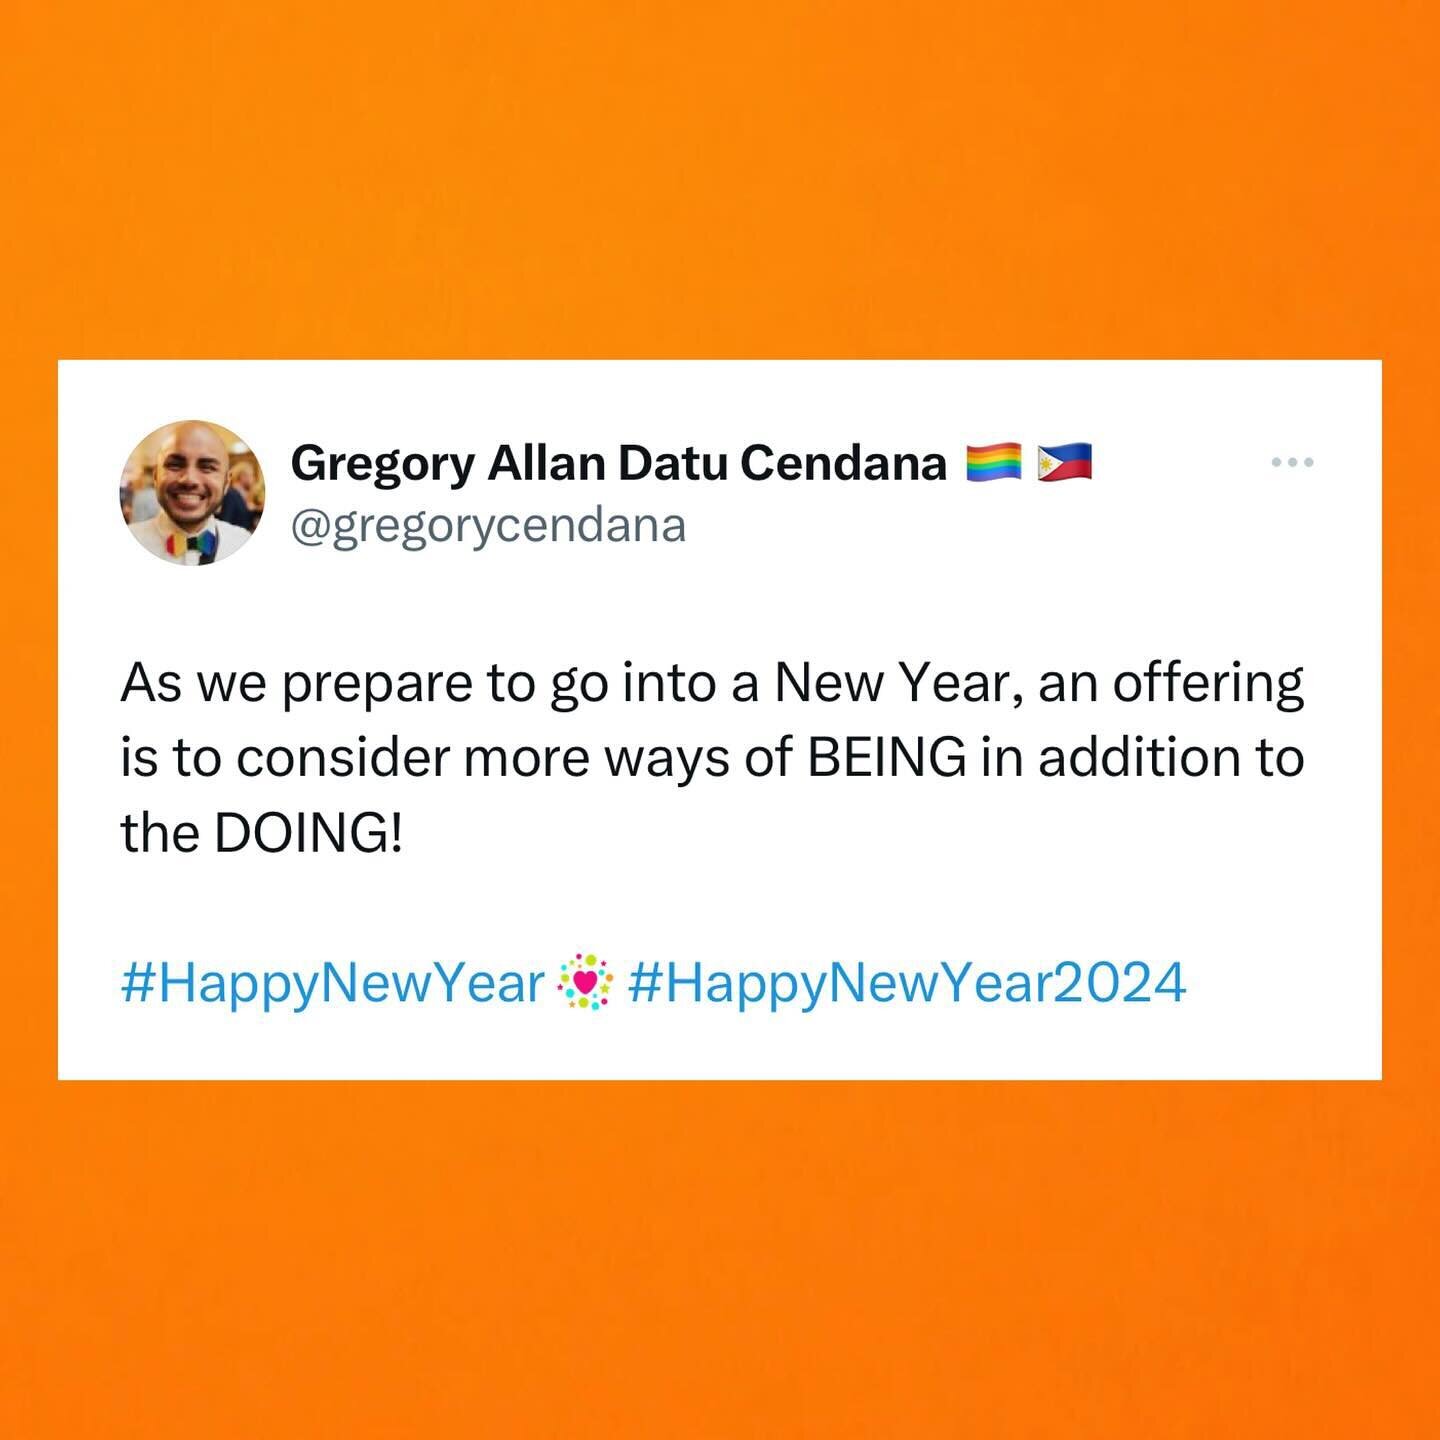 As we prepare to go into a New Year, an offering is to consider more ways of BEING in addition to the DOING!

#HappyNewYear&nbsp;#HappyNewYear2024 #GregDances 

BE unapologetic about all aspects of your identity
BE gracious including to yourself 
BE 